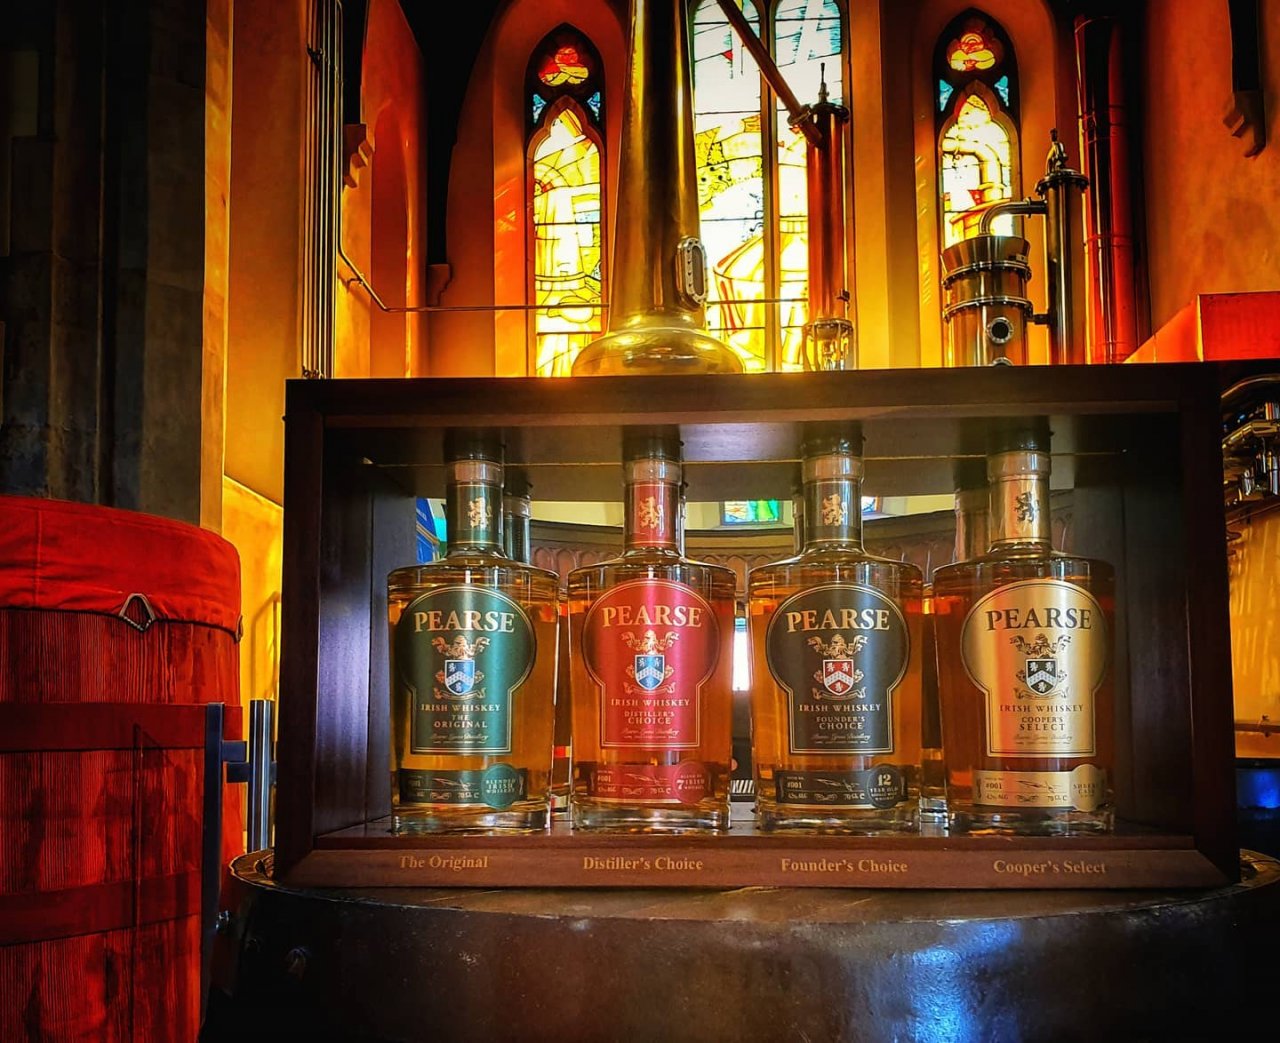 Four bottles of Pearse Lyons Irish Whiskey on whiskey barrel in Pearse Lyons Distillery